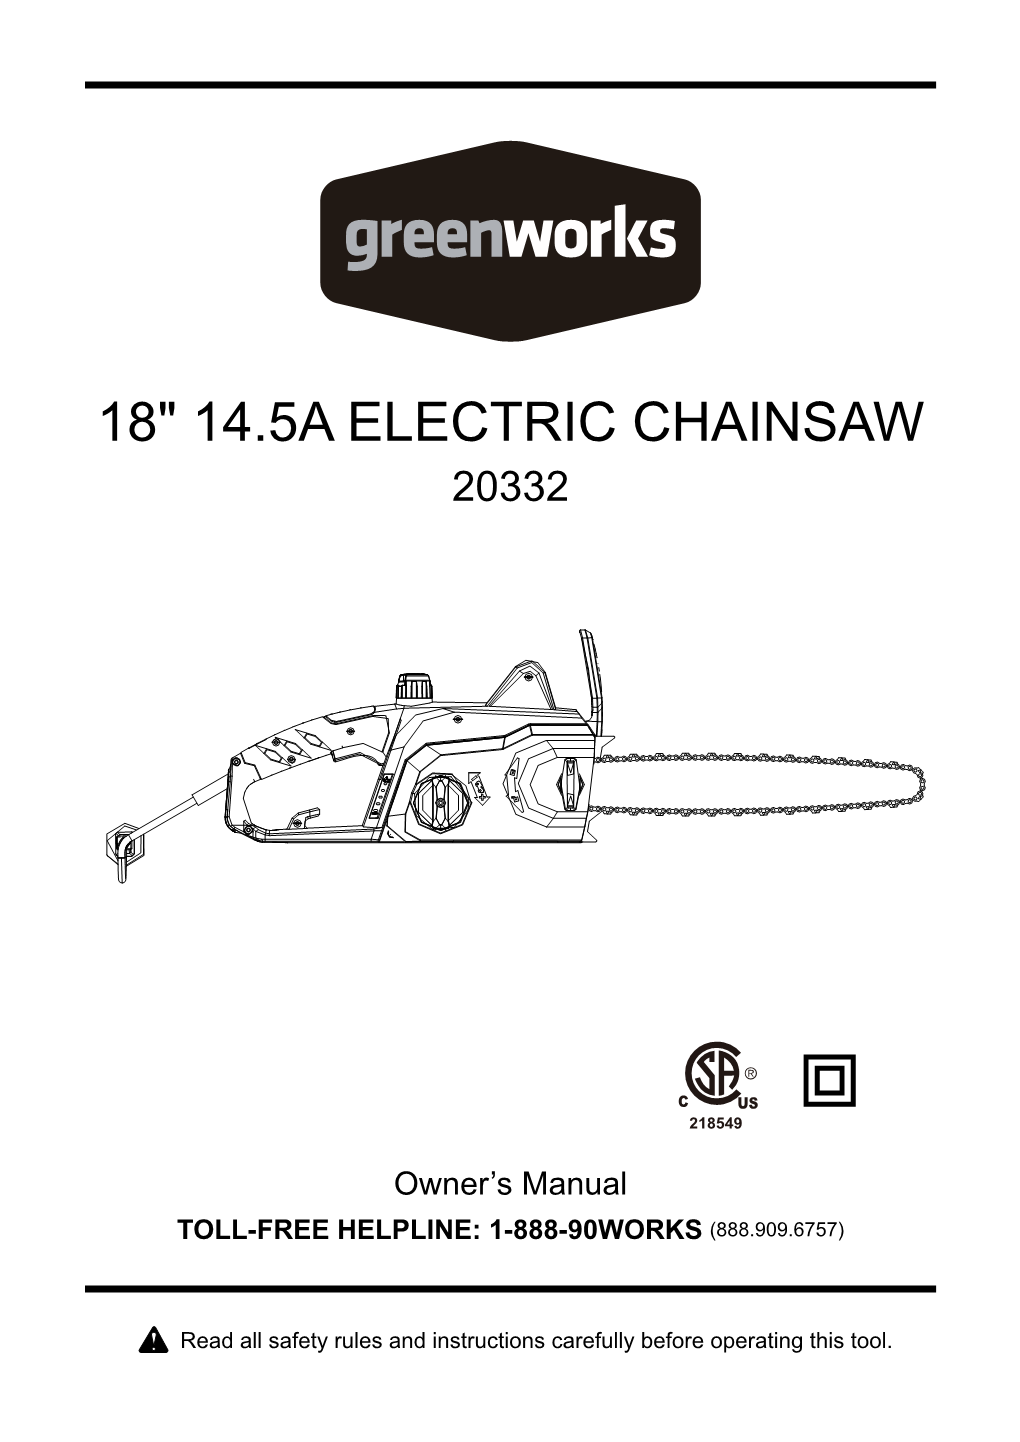 18" 14.5A Electric Chainsaw 20332